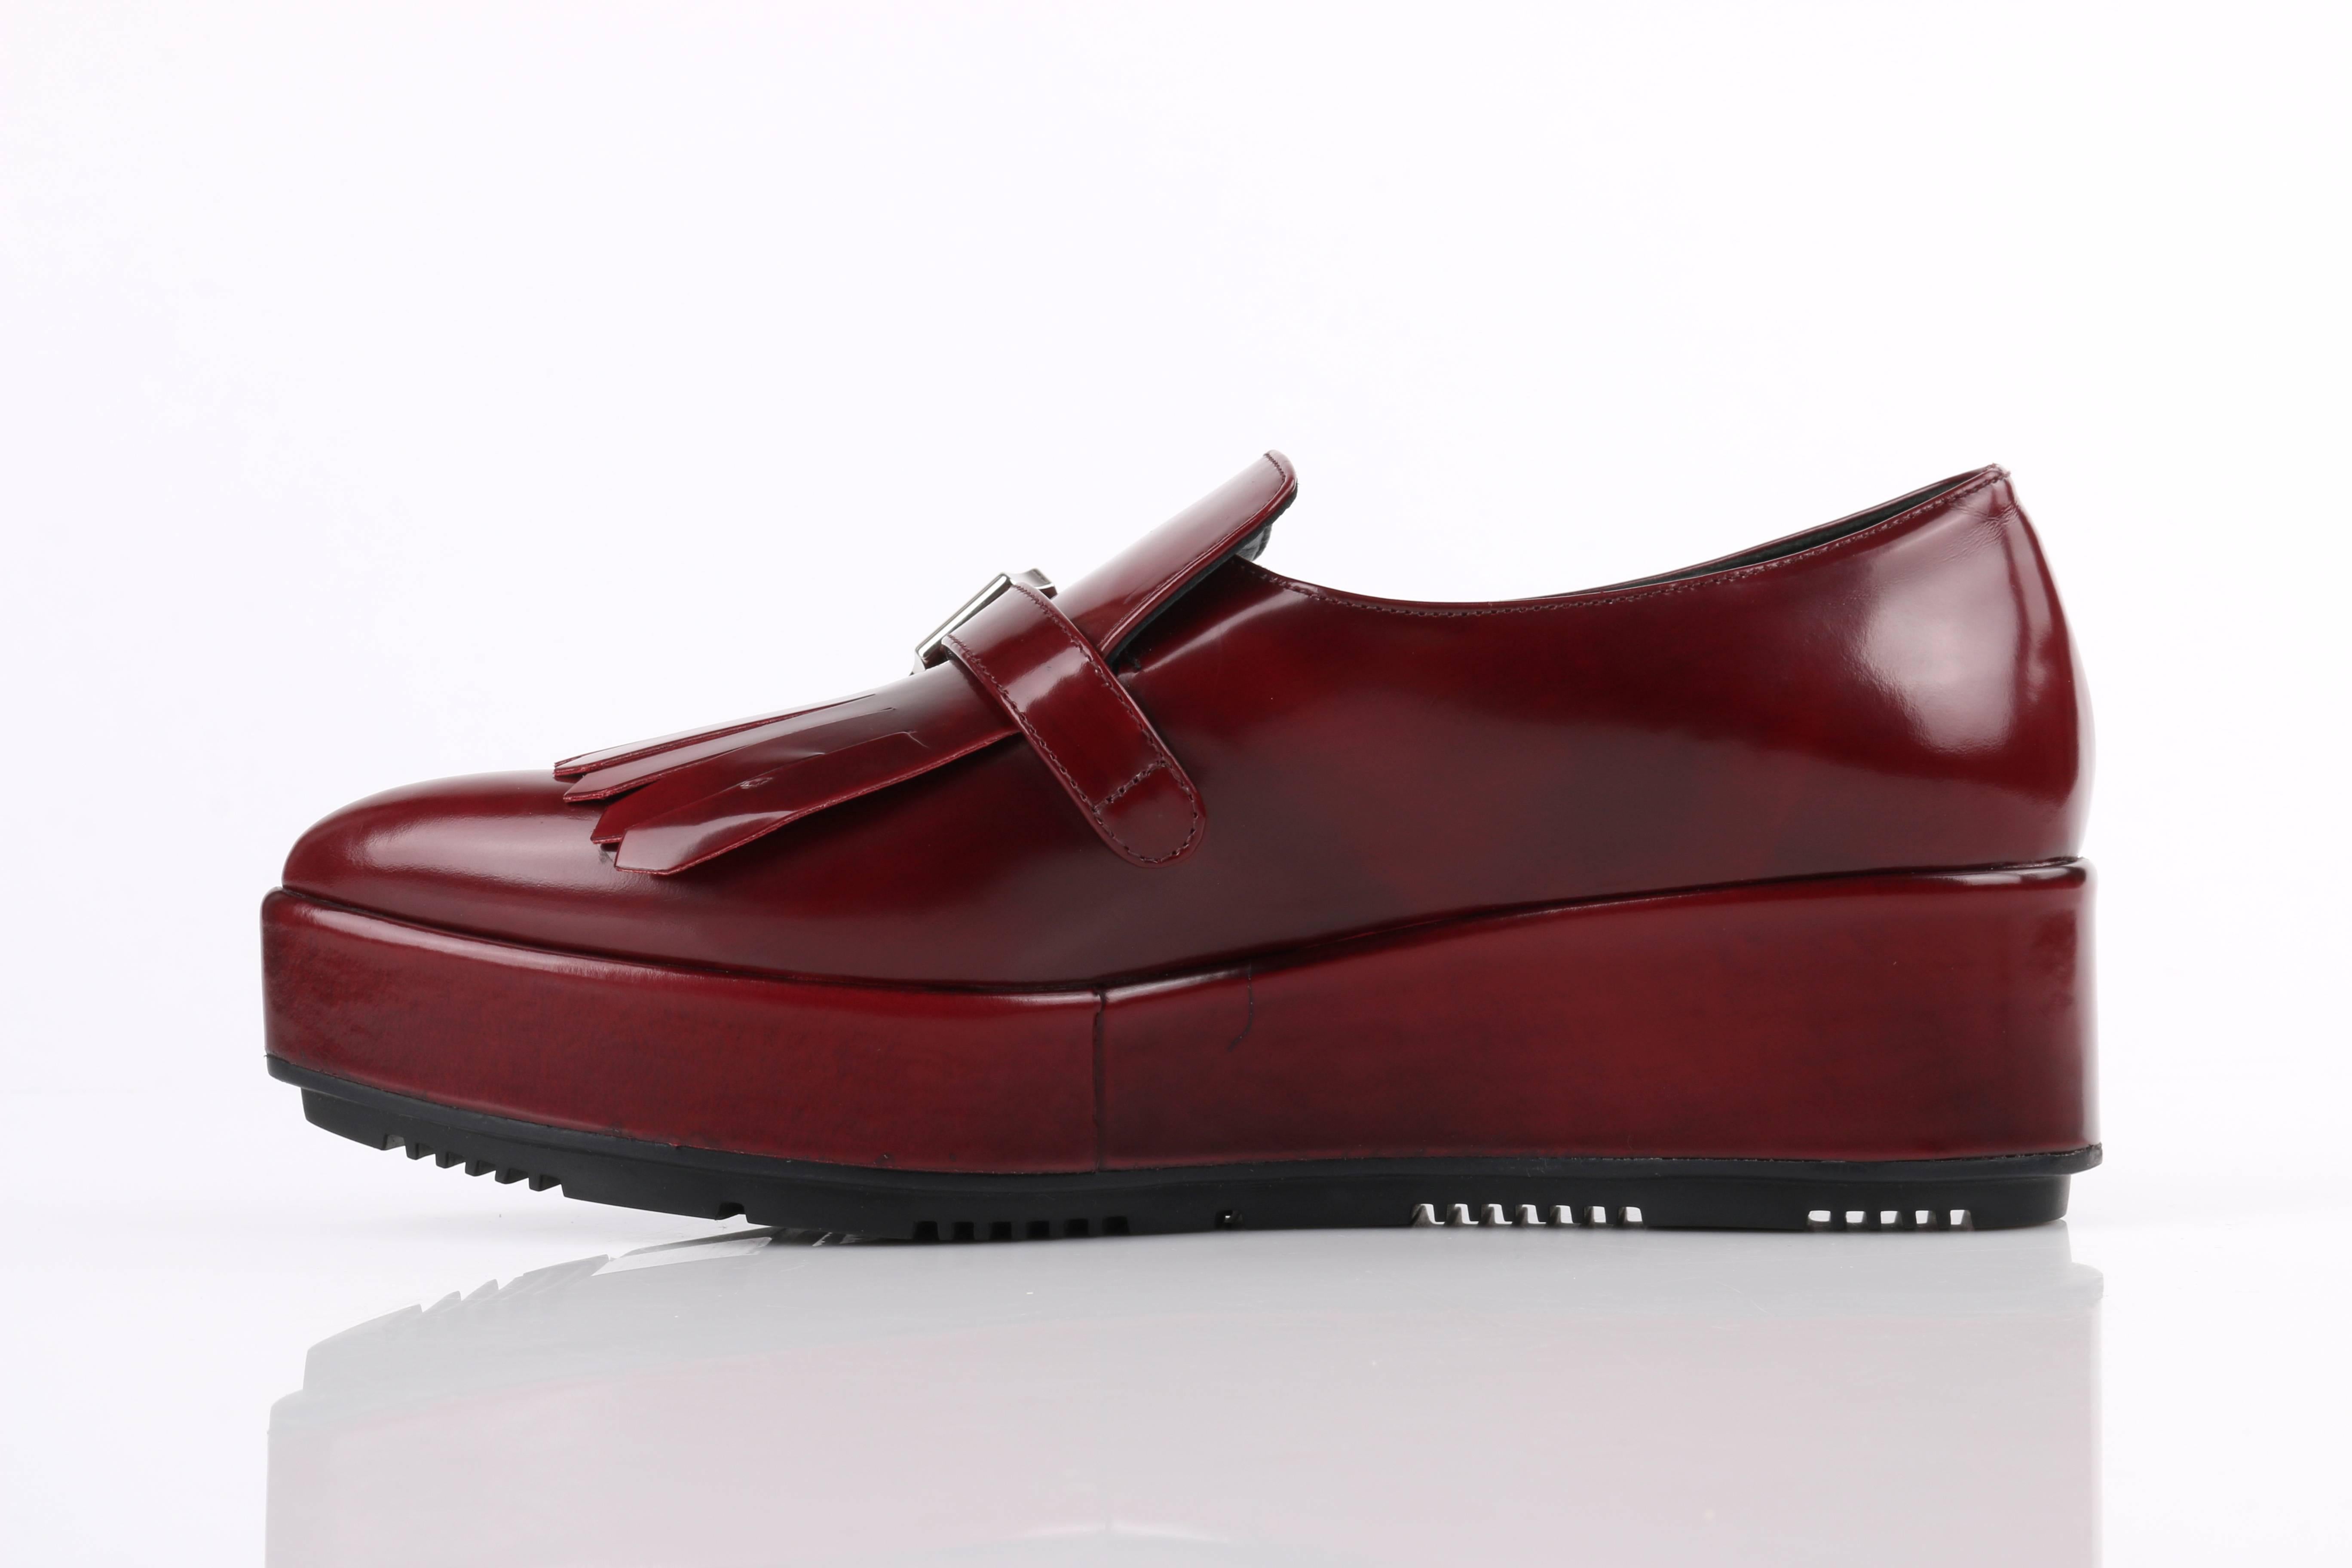 Prada Autumn/Winter 2013 Burgundy red spazzolato (patent/brushed) leather platform oxford. Burgundy red smoke patent (spazzolato fume) calfskin leather body. Pointed toe. Front kiltie fringe detail. Single adjustable strap along top with